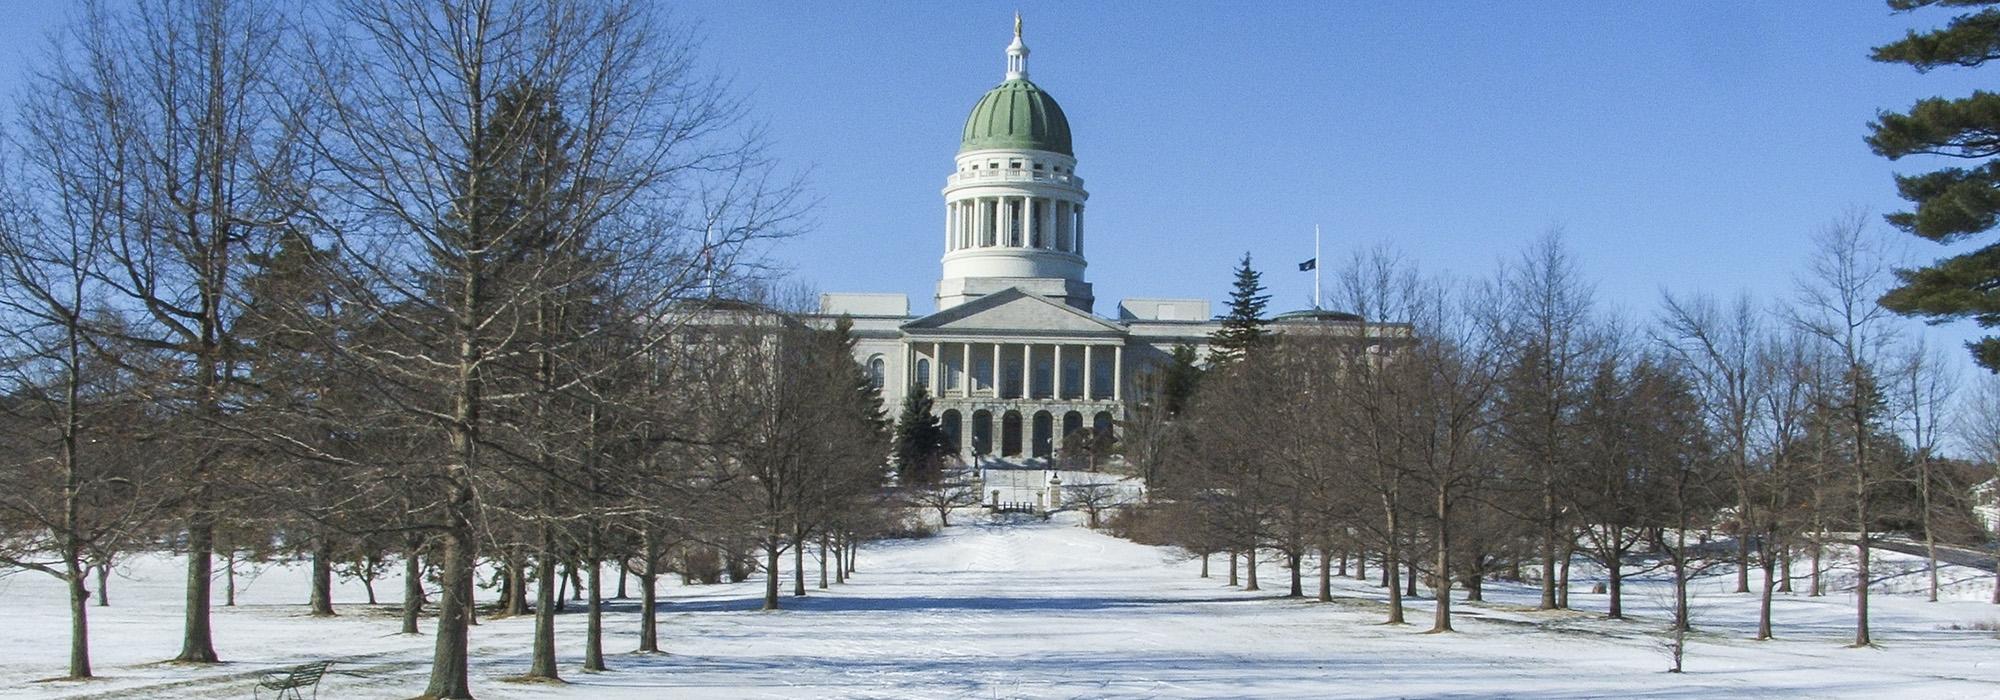 Maine State Capitol Grounds, Augusta, ME